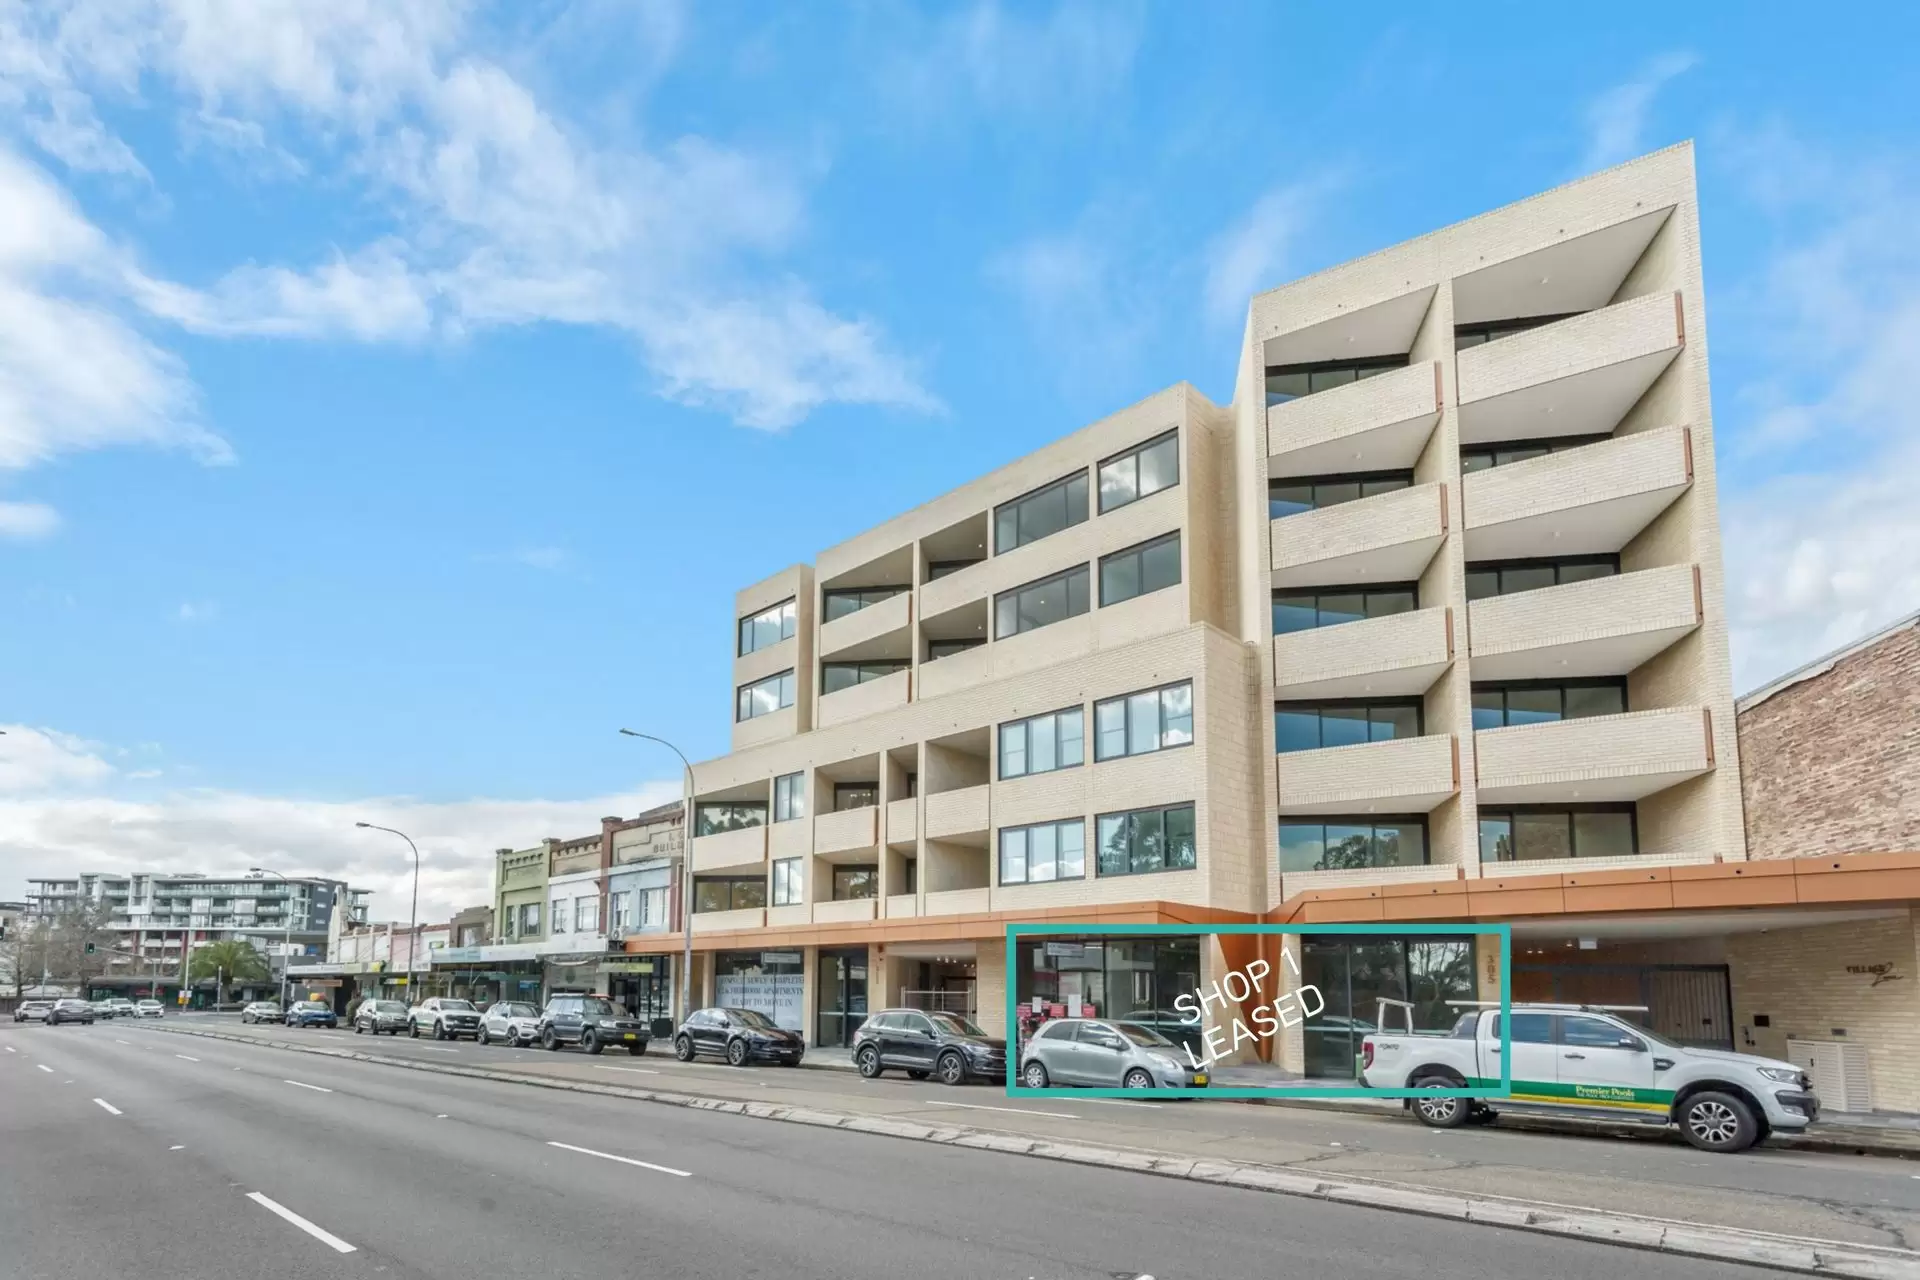 Retail/305 Pacific Highway, Lindfield For Lease by Shead Property - image 1